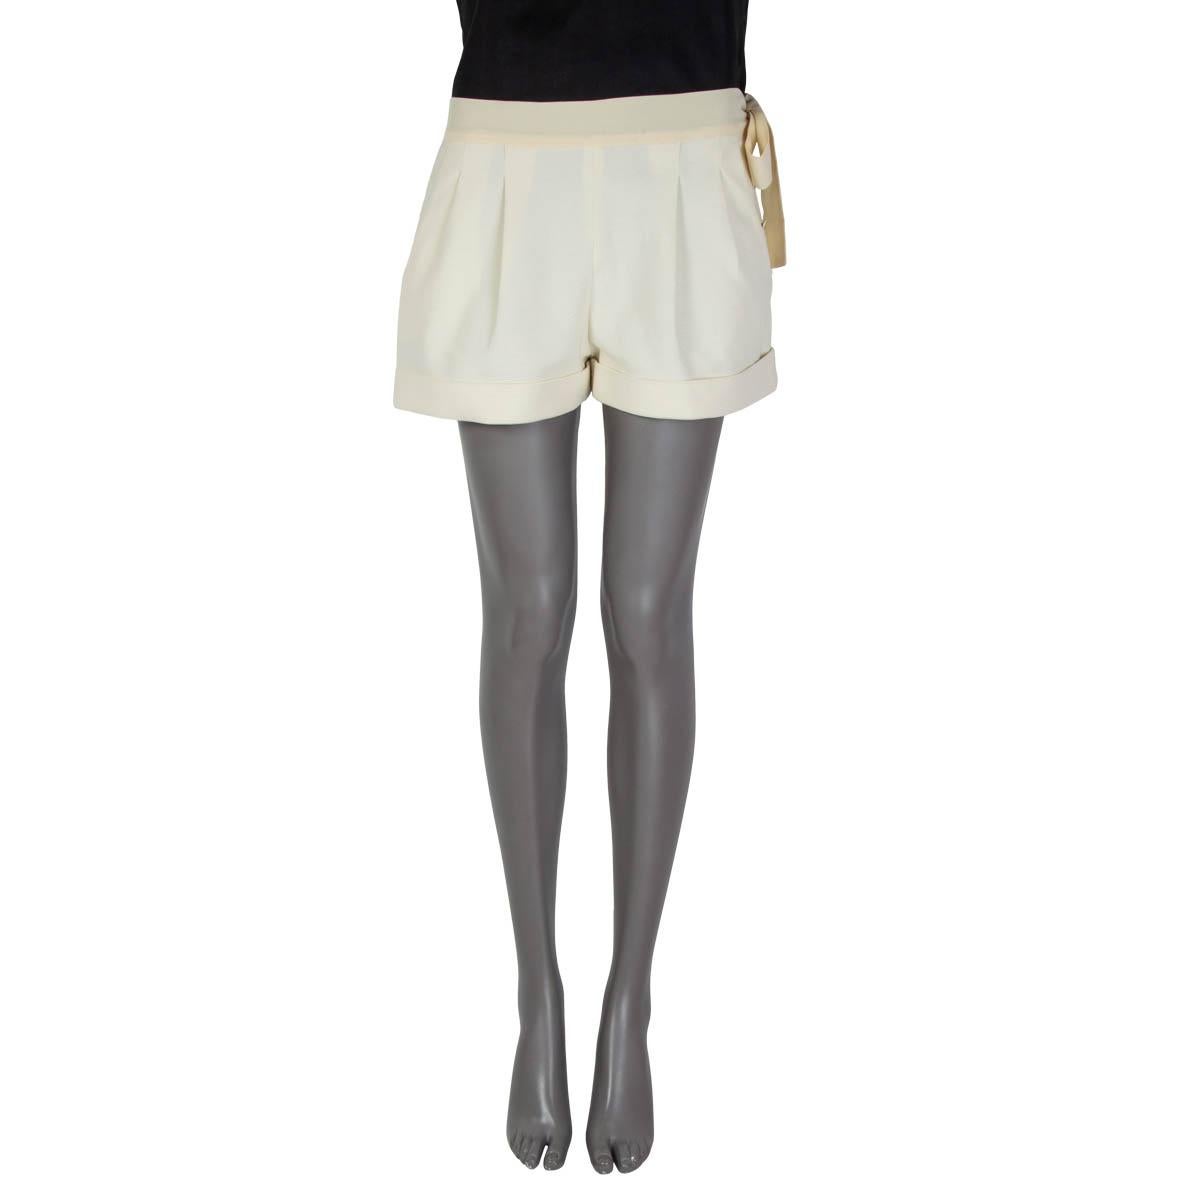 100% authentic  Fendi pleated rib shorts in off-white cotton (97%) and lycra (3%). Embellished with an off-white waist band. Opens with four metallic buttons on the side. Unlined. Have been worn and are in excellent condition.

Measurements
Tag